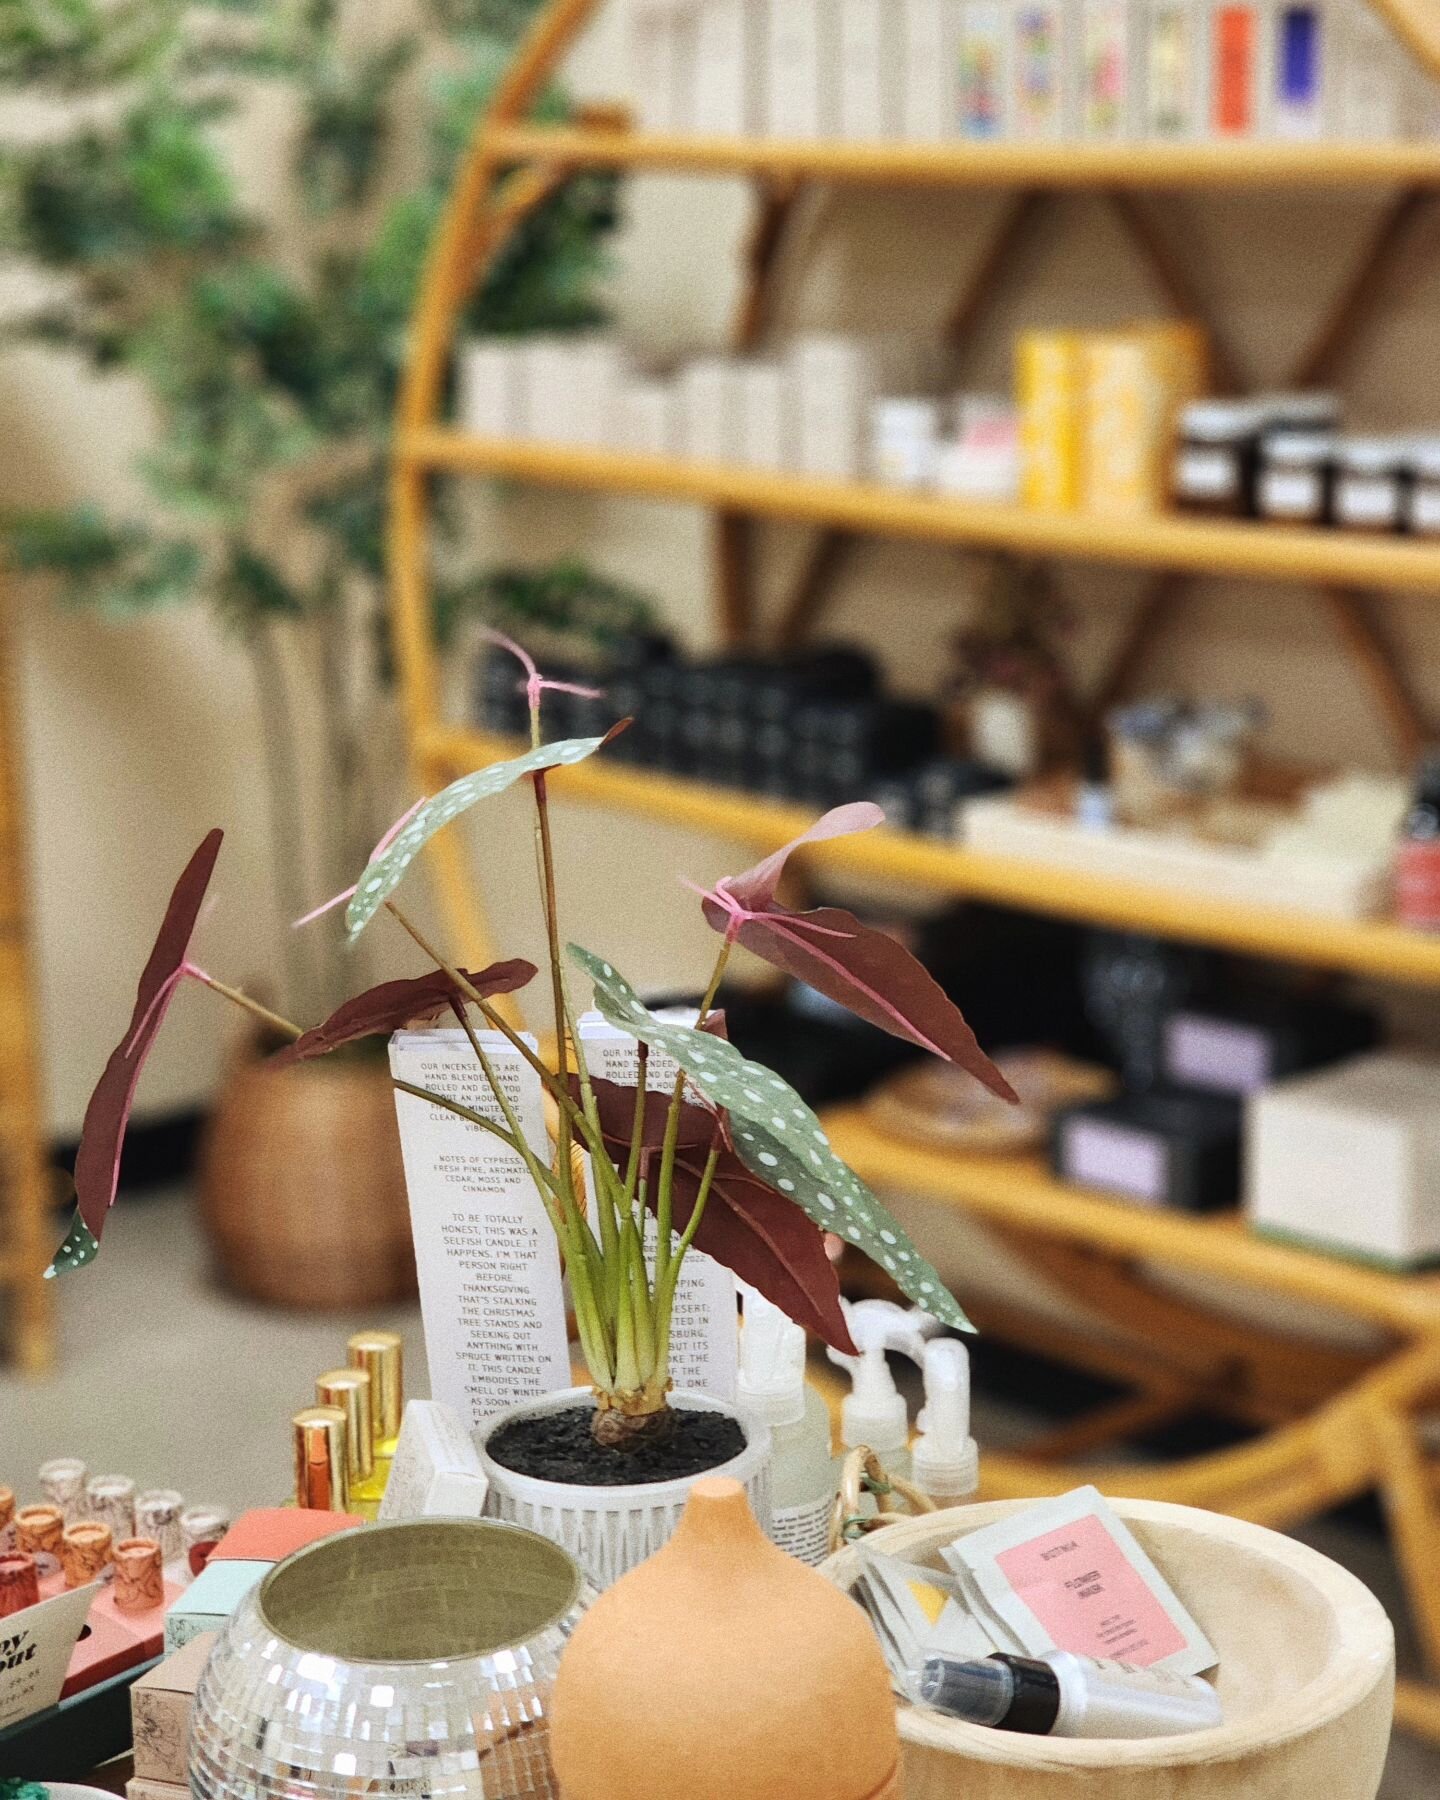 We love our holistic beauty haven 🤍

Dahlia's commitment to you:
✿ Holistic Care - We blend ancient wisdom with modern techniques for a truly balanced approach to beauty.
✿ Personalized Experience - You're unique, and your skin deserves treatments t